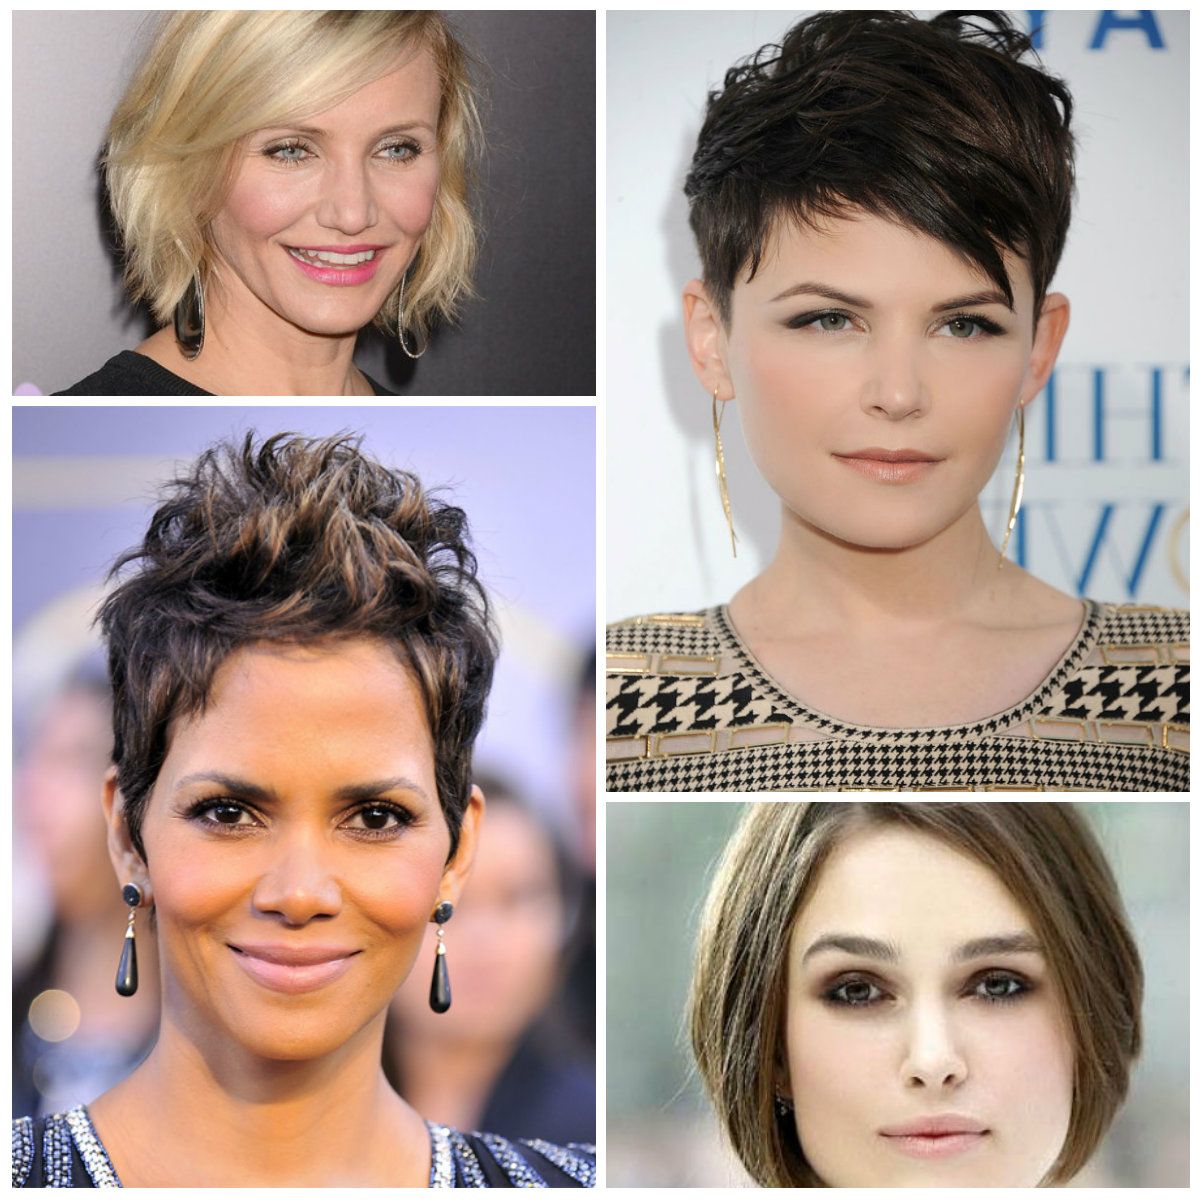 Find Out Full Gallery Of Unique Short Hair For Oval Face 2017 Inside Short Hairstyles For Women With Oval Face (View 19 of 25)